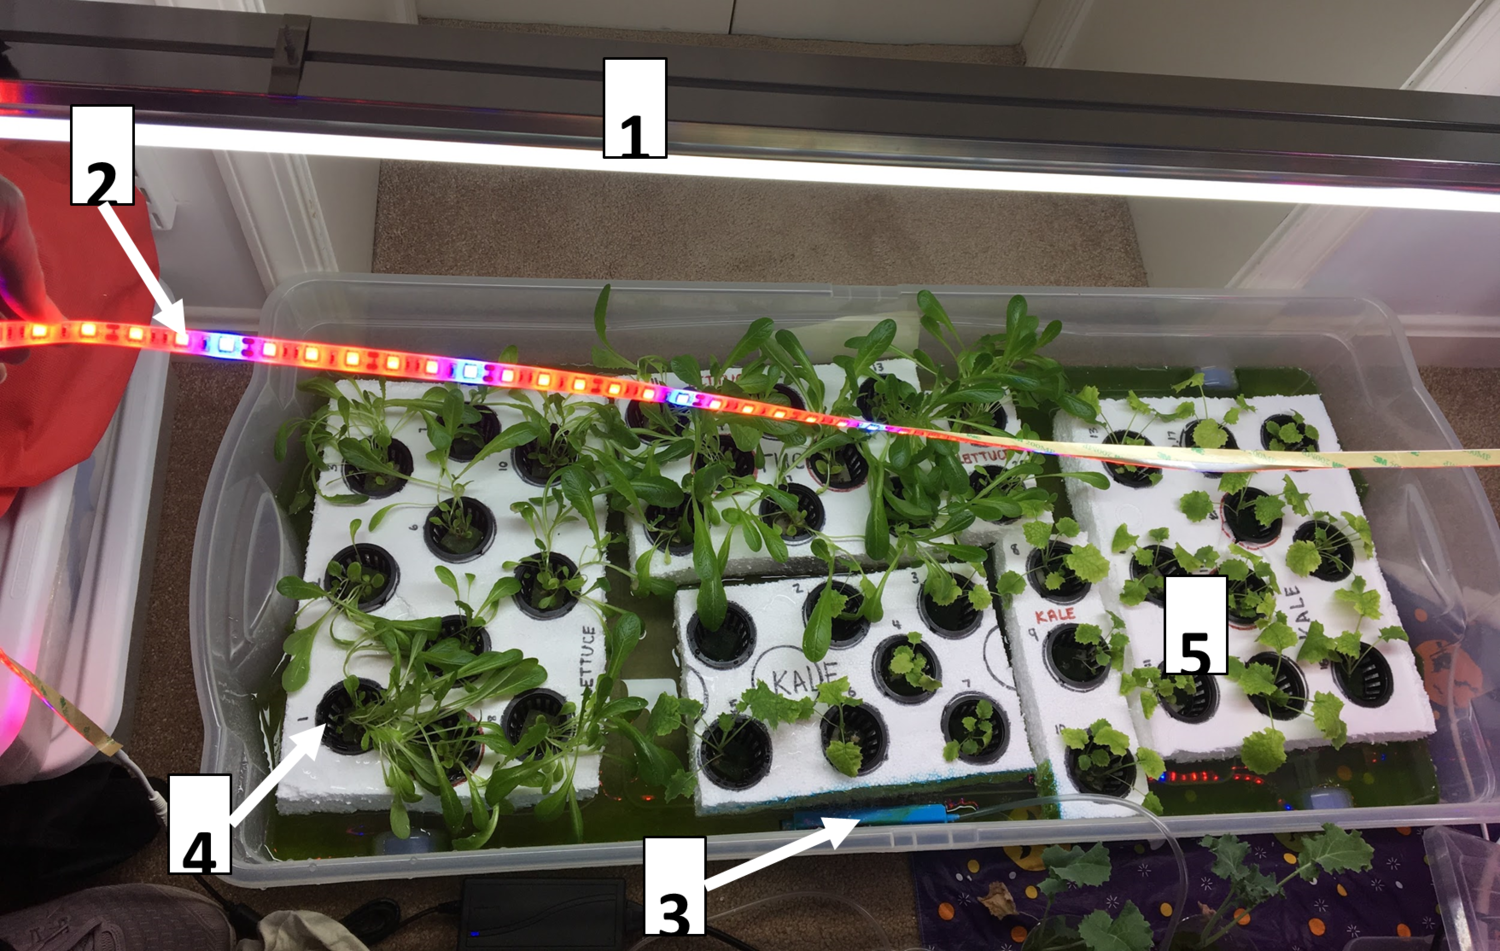 An Experiment on Hydroponic Gardening